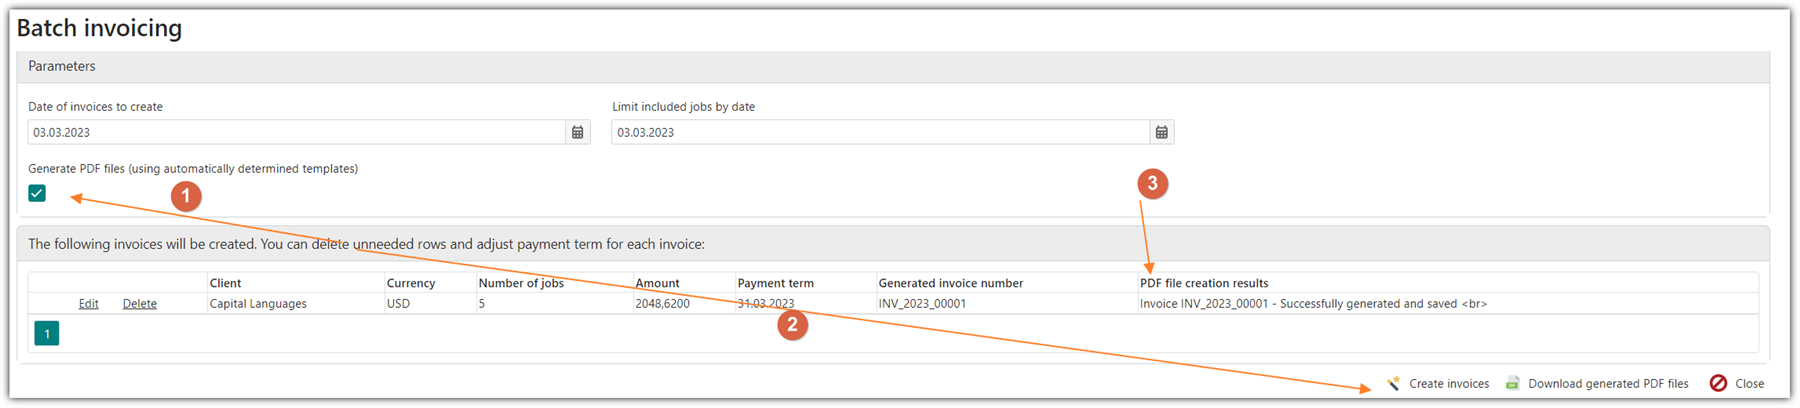 Trados Studio Batch Invoicing screen showing parameters set for invoice creation, a list of invoices to be generated with one marked for deletion, and a notification of successful PDF file generation.